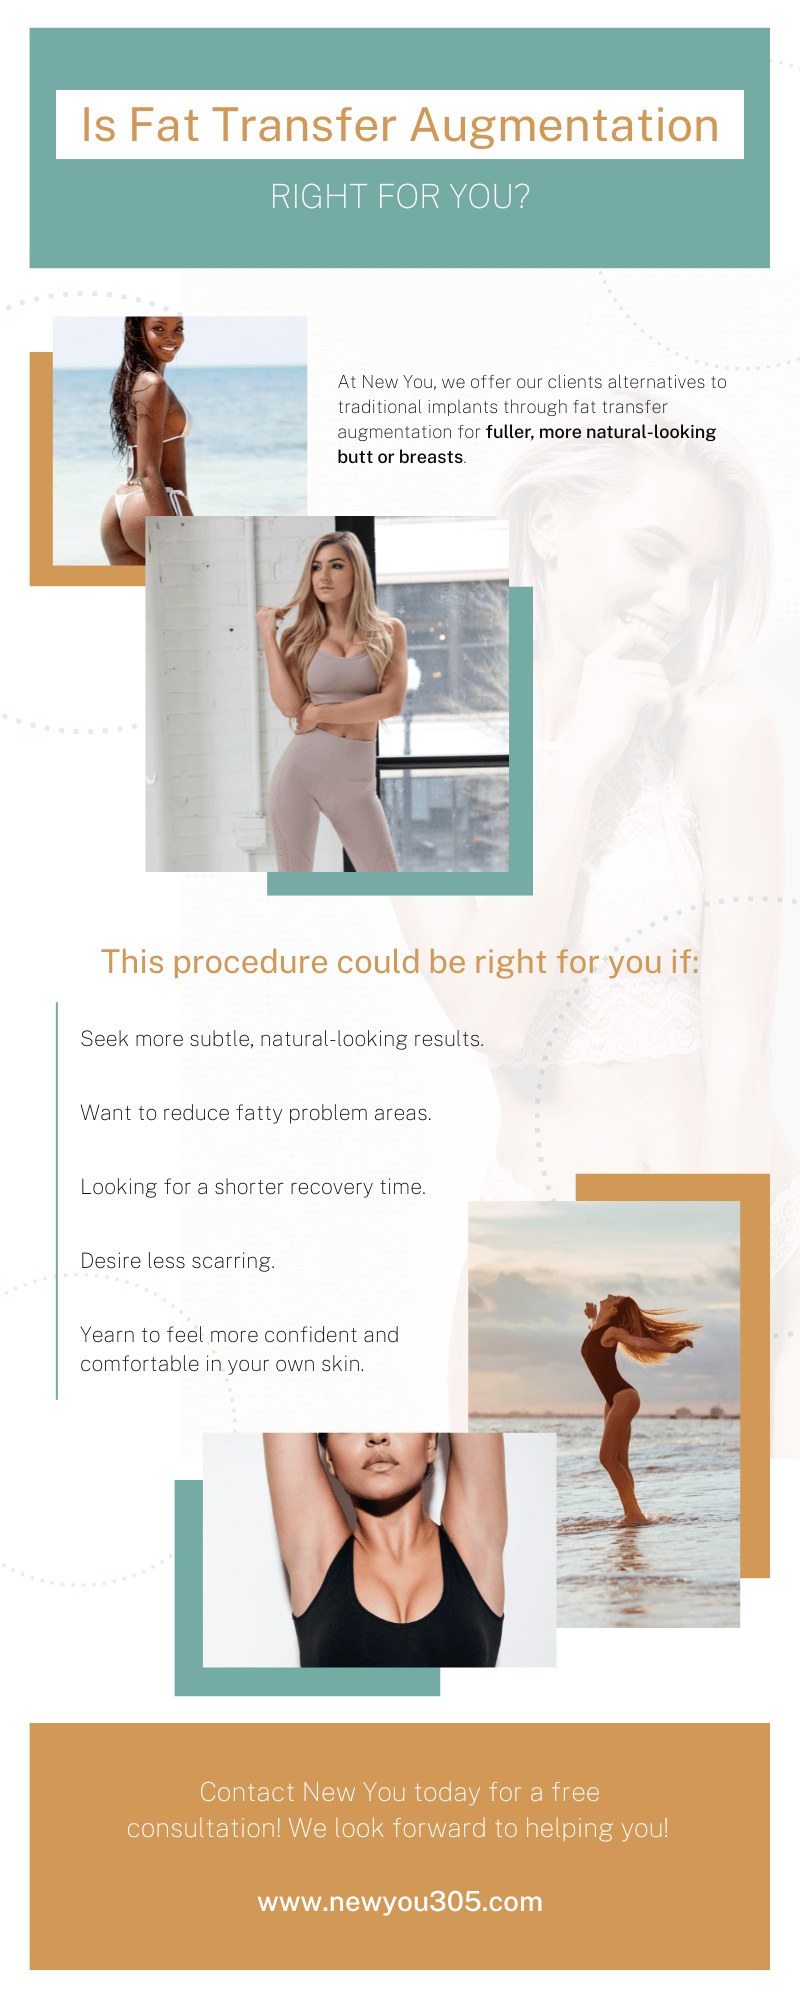 M31617 - New You - Fat Transfer for Butts and Breasts - Infographic (1).png